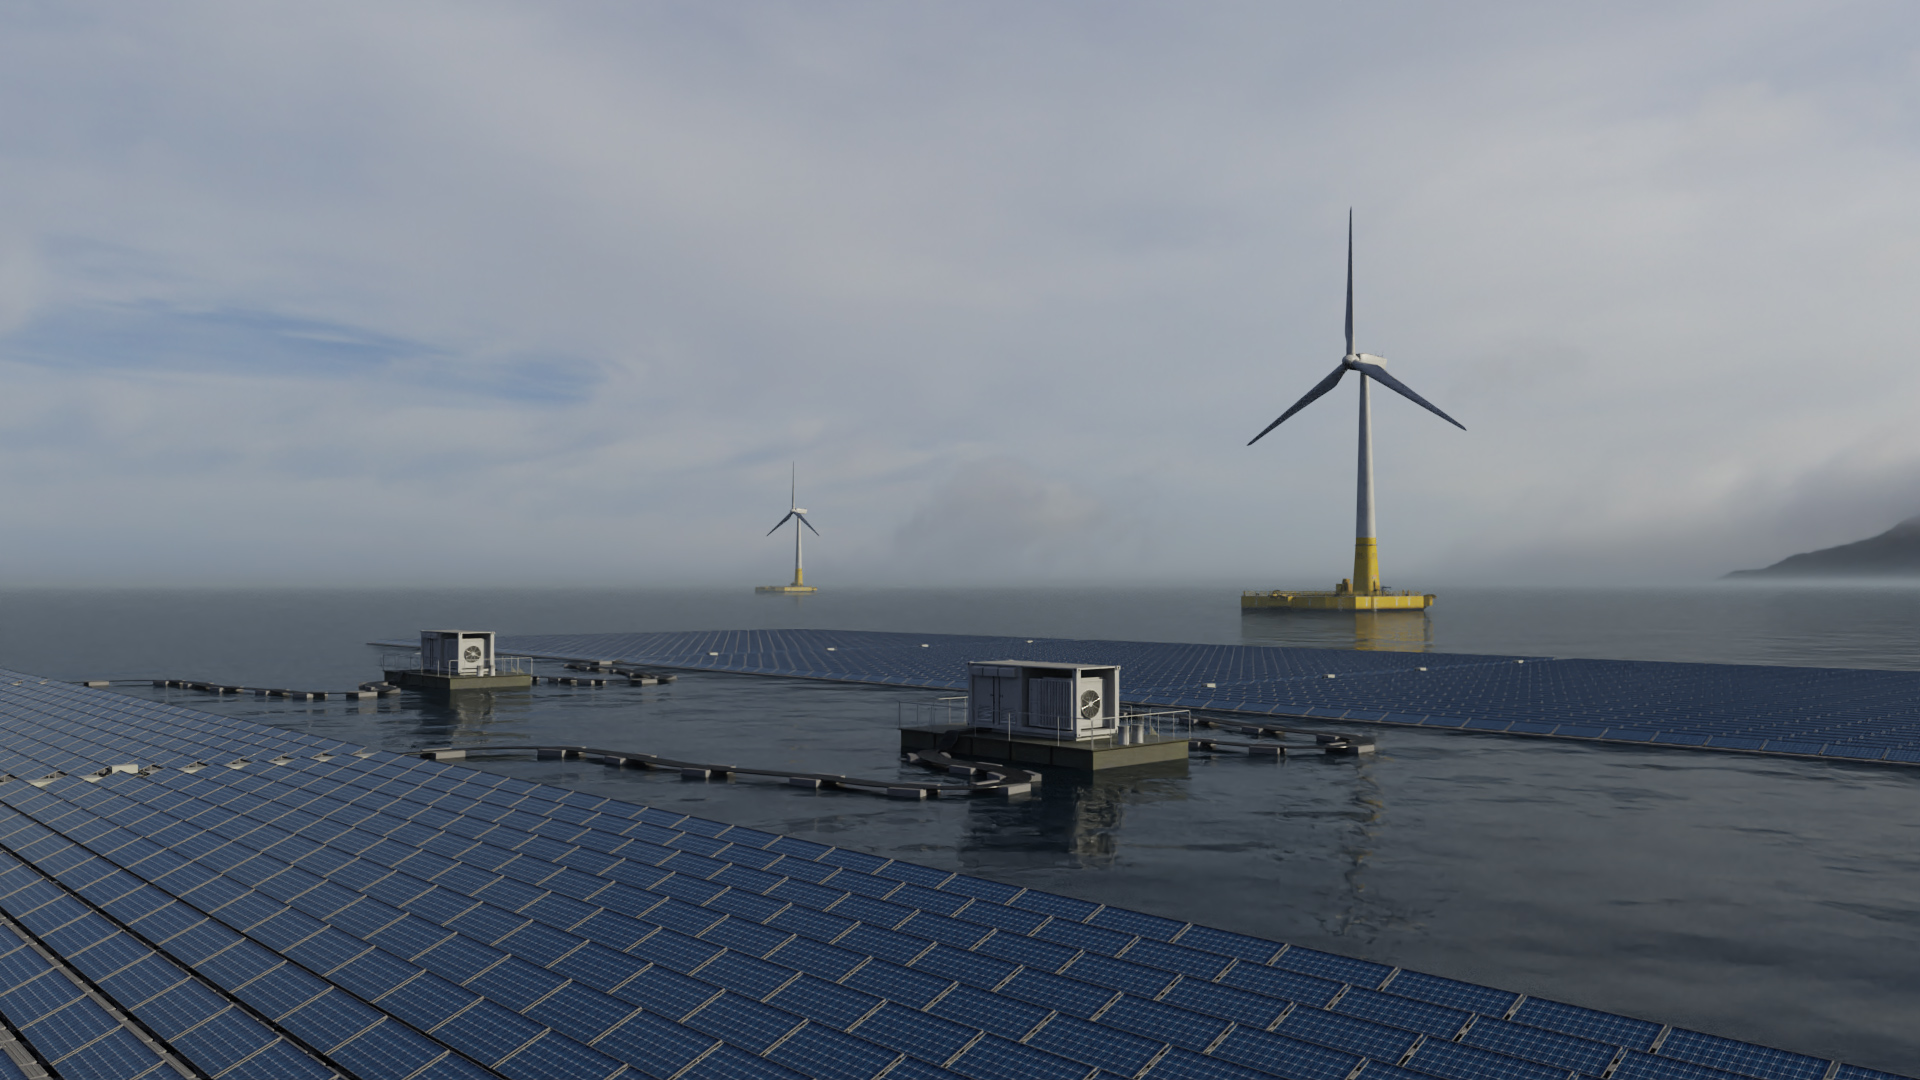 Offshore solar farm and floating wind farm visualization